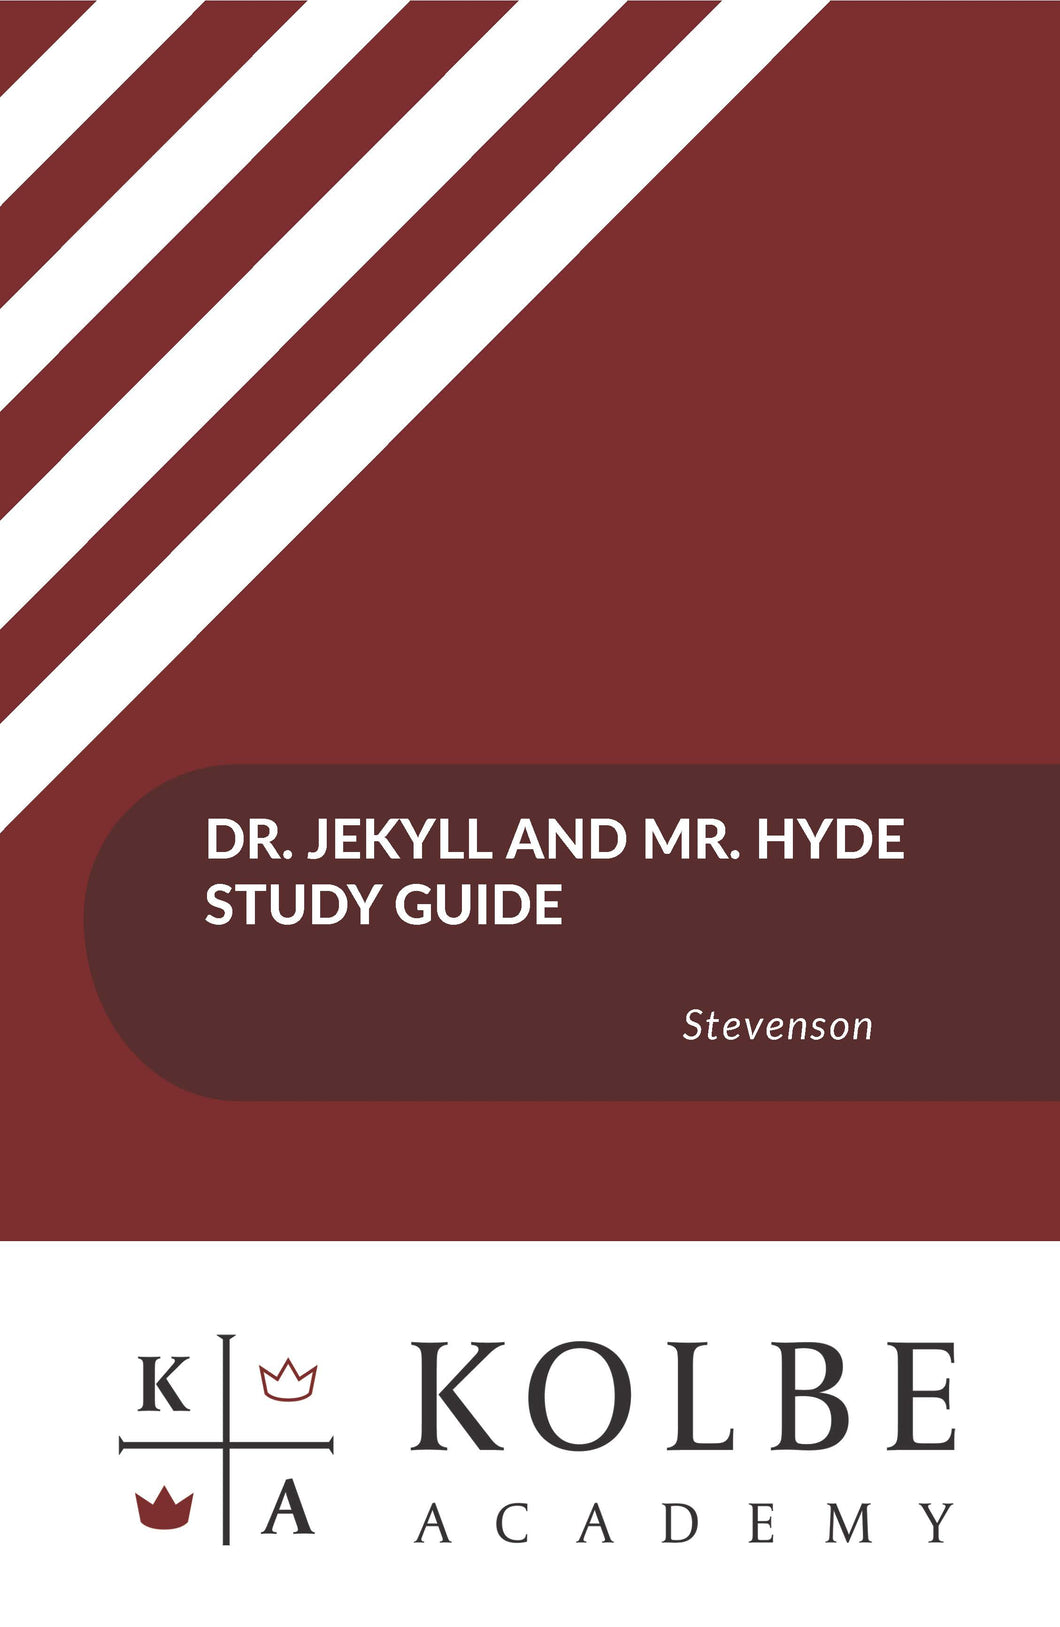 Dr. Jekyll and Mr. Hyde Study Guide